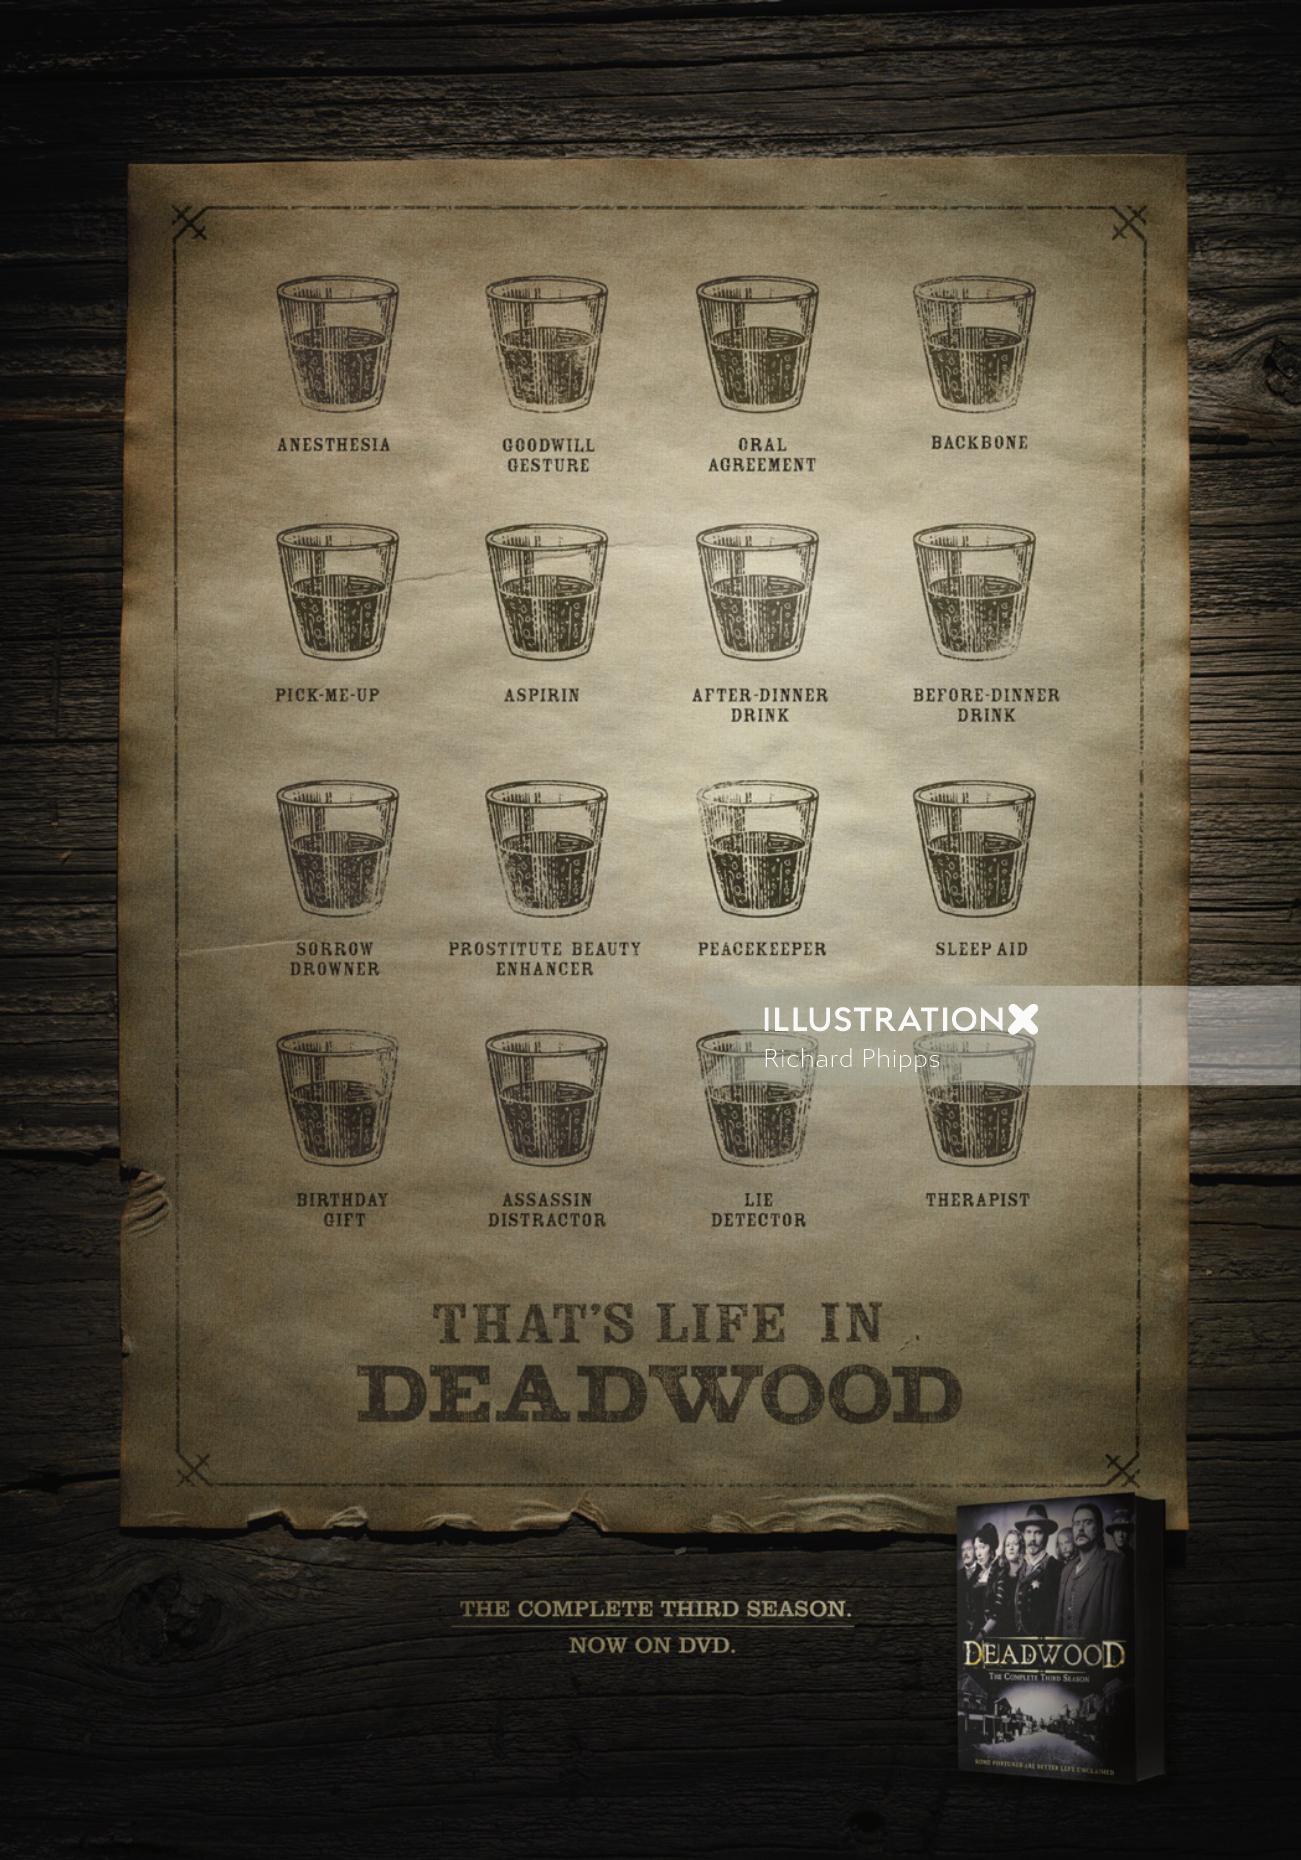 Thats life in dead wood
